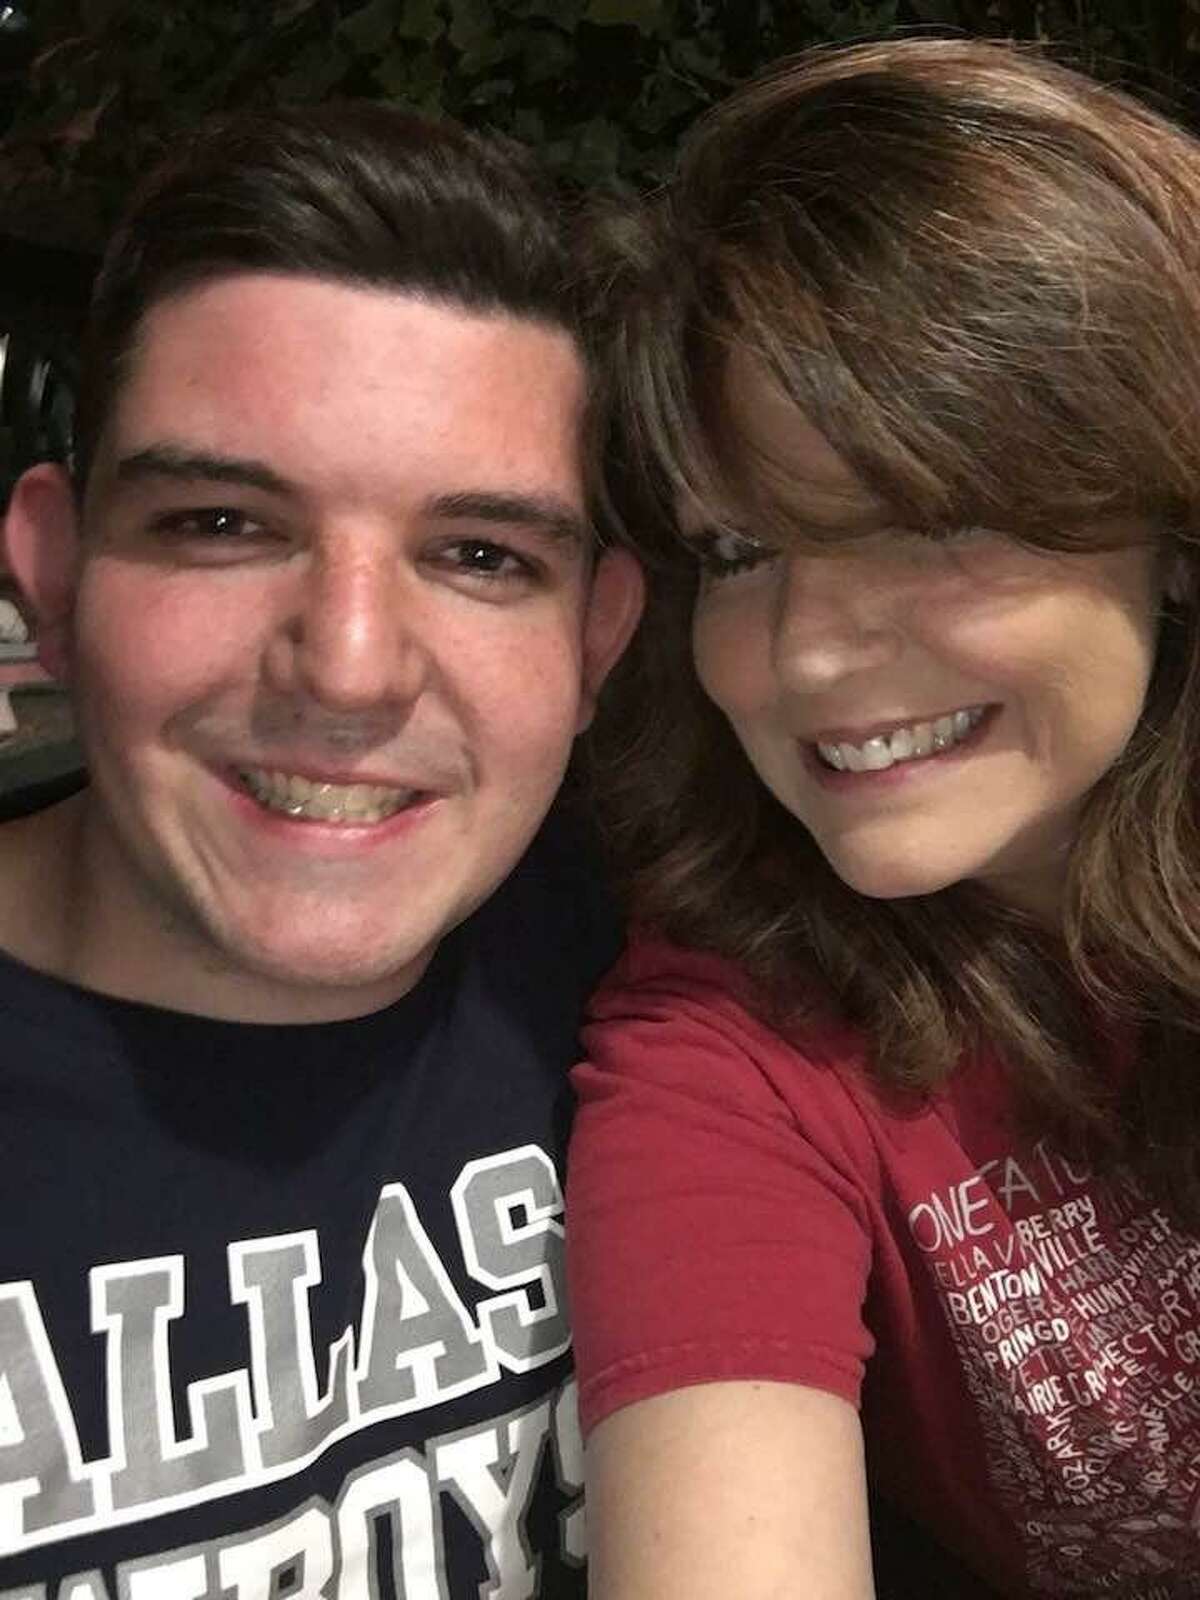 James Phillip Miranda, 23, of Mount Pleasant, was one of five young adults killed in a fire that someone intentionally set at Iconic Village Apartments in San Marcos on July 20, 2018. At right is his mother, Ginger Kesterson. Miranda's parents are among those who filed a lawsuit that is set for a jury trial starting Nov. 3.